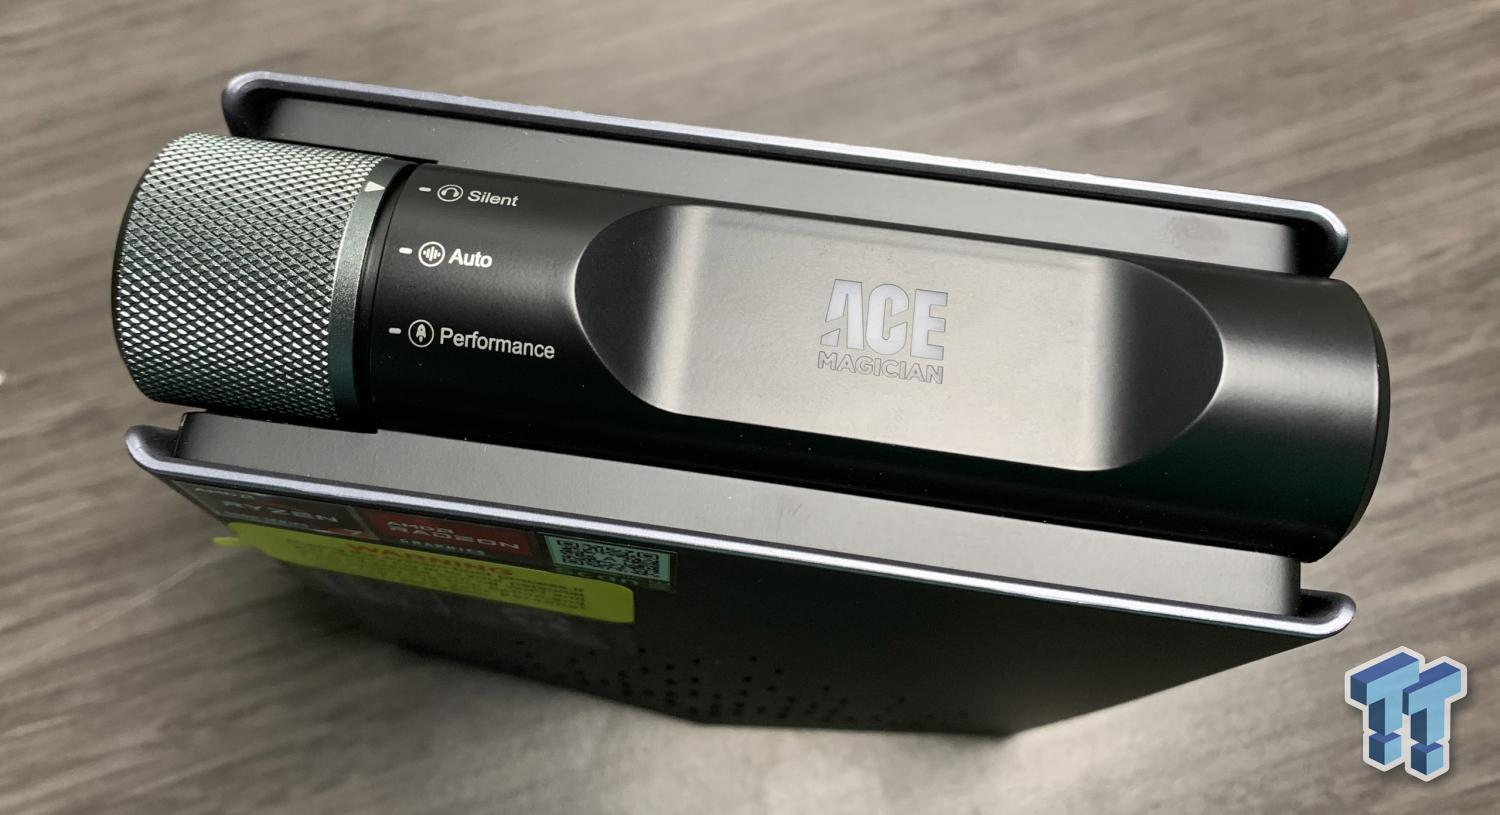 Ace Magician AMR5 in test: A lot of mini, little gaming PC